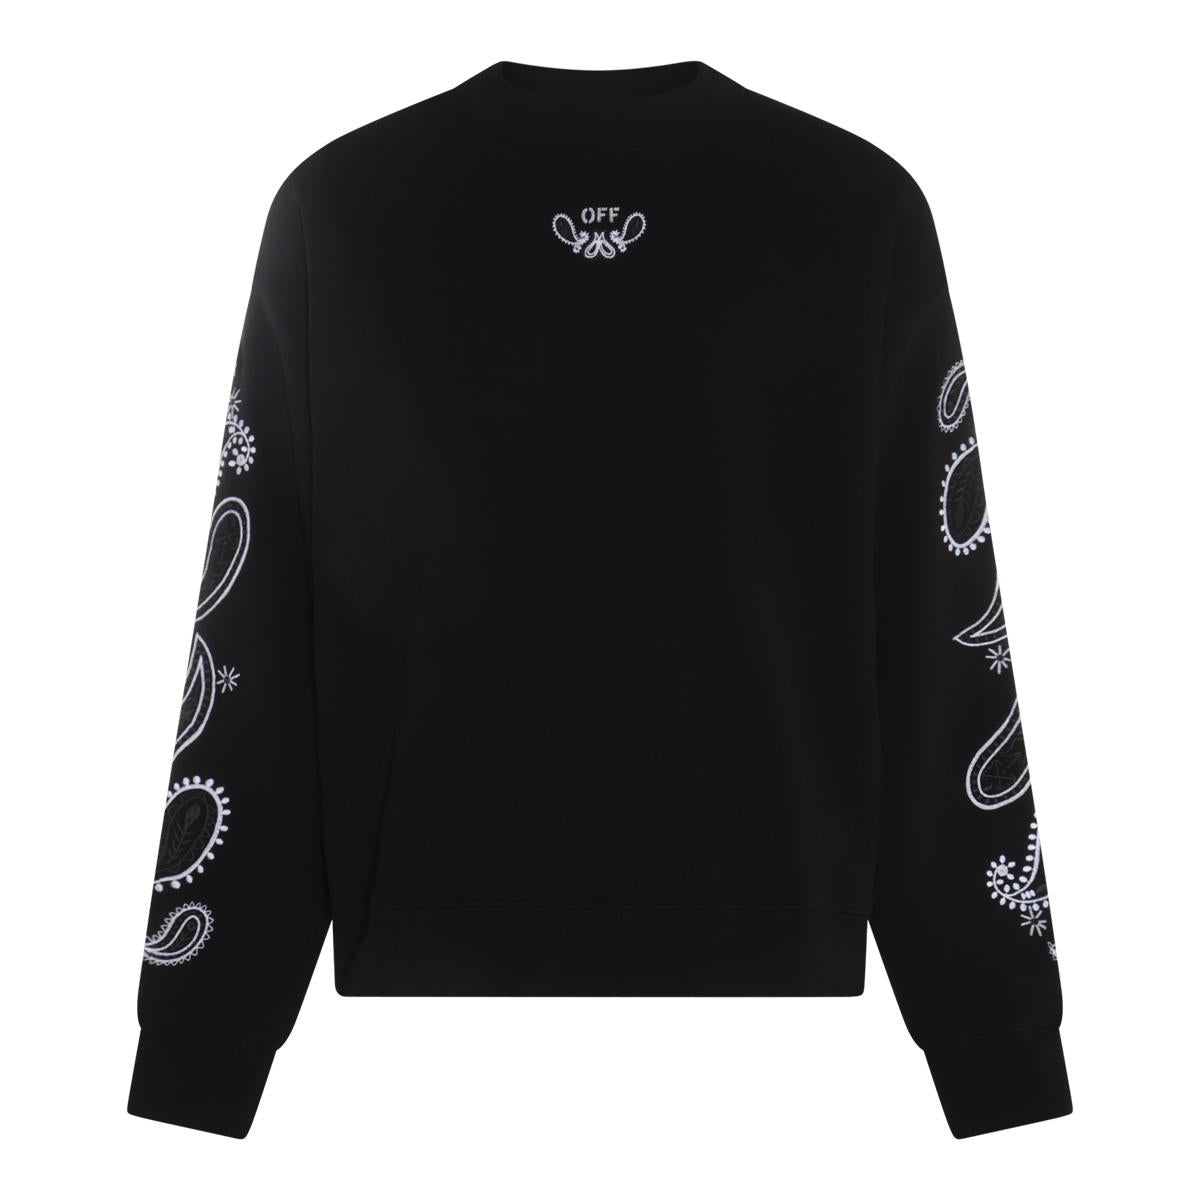 OFF-WHITE OFF-WHITE jumperS BLACK